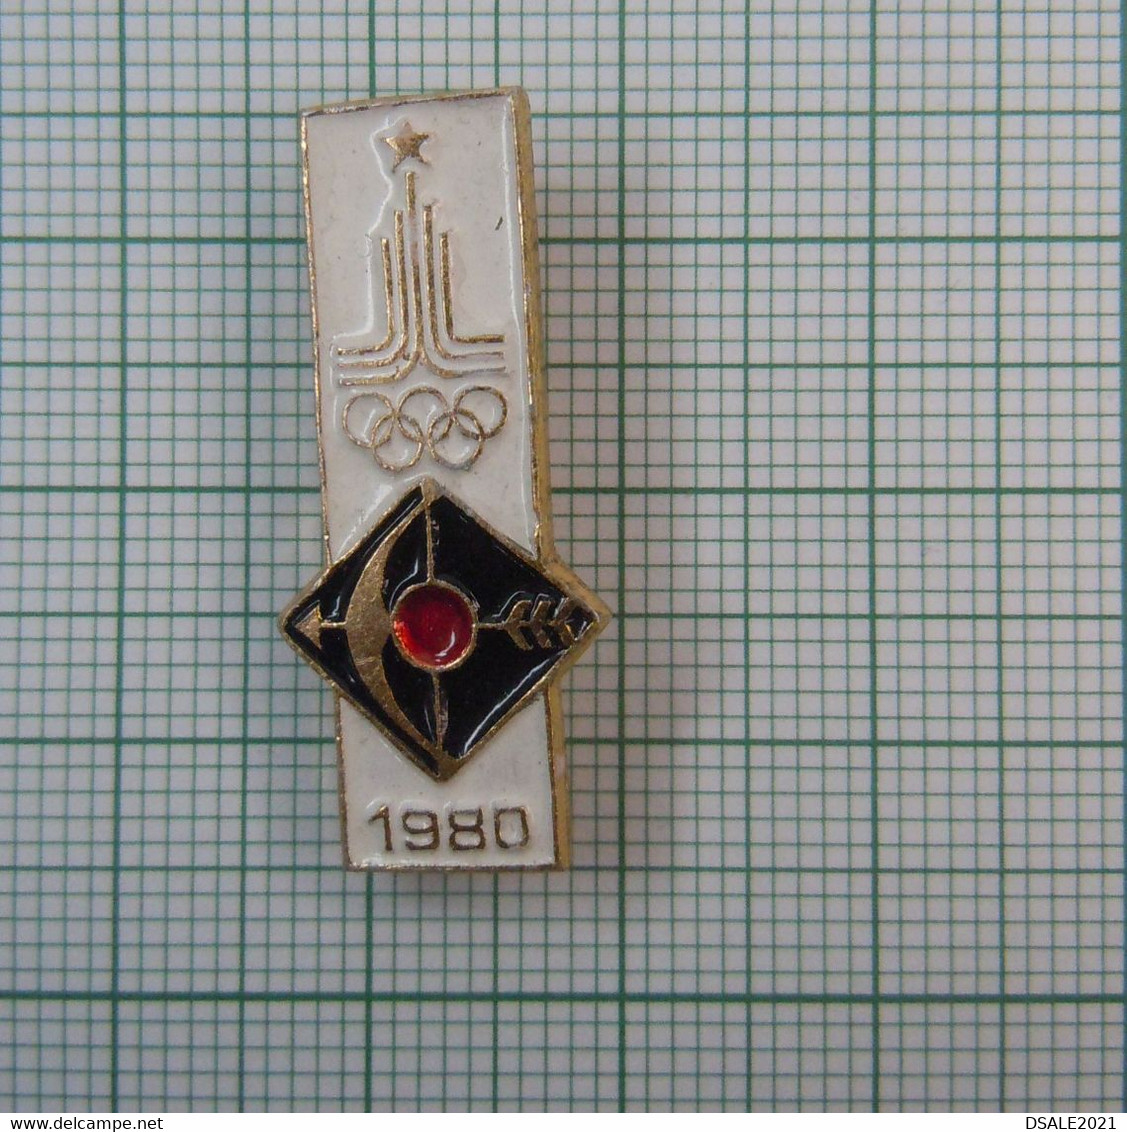 Russia USSR Russland Sowjetunion Moscow 1980 Summer Olympic Archery Sport Mascot Vintage Pin Badge (m984) - Tir à L'Arc